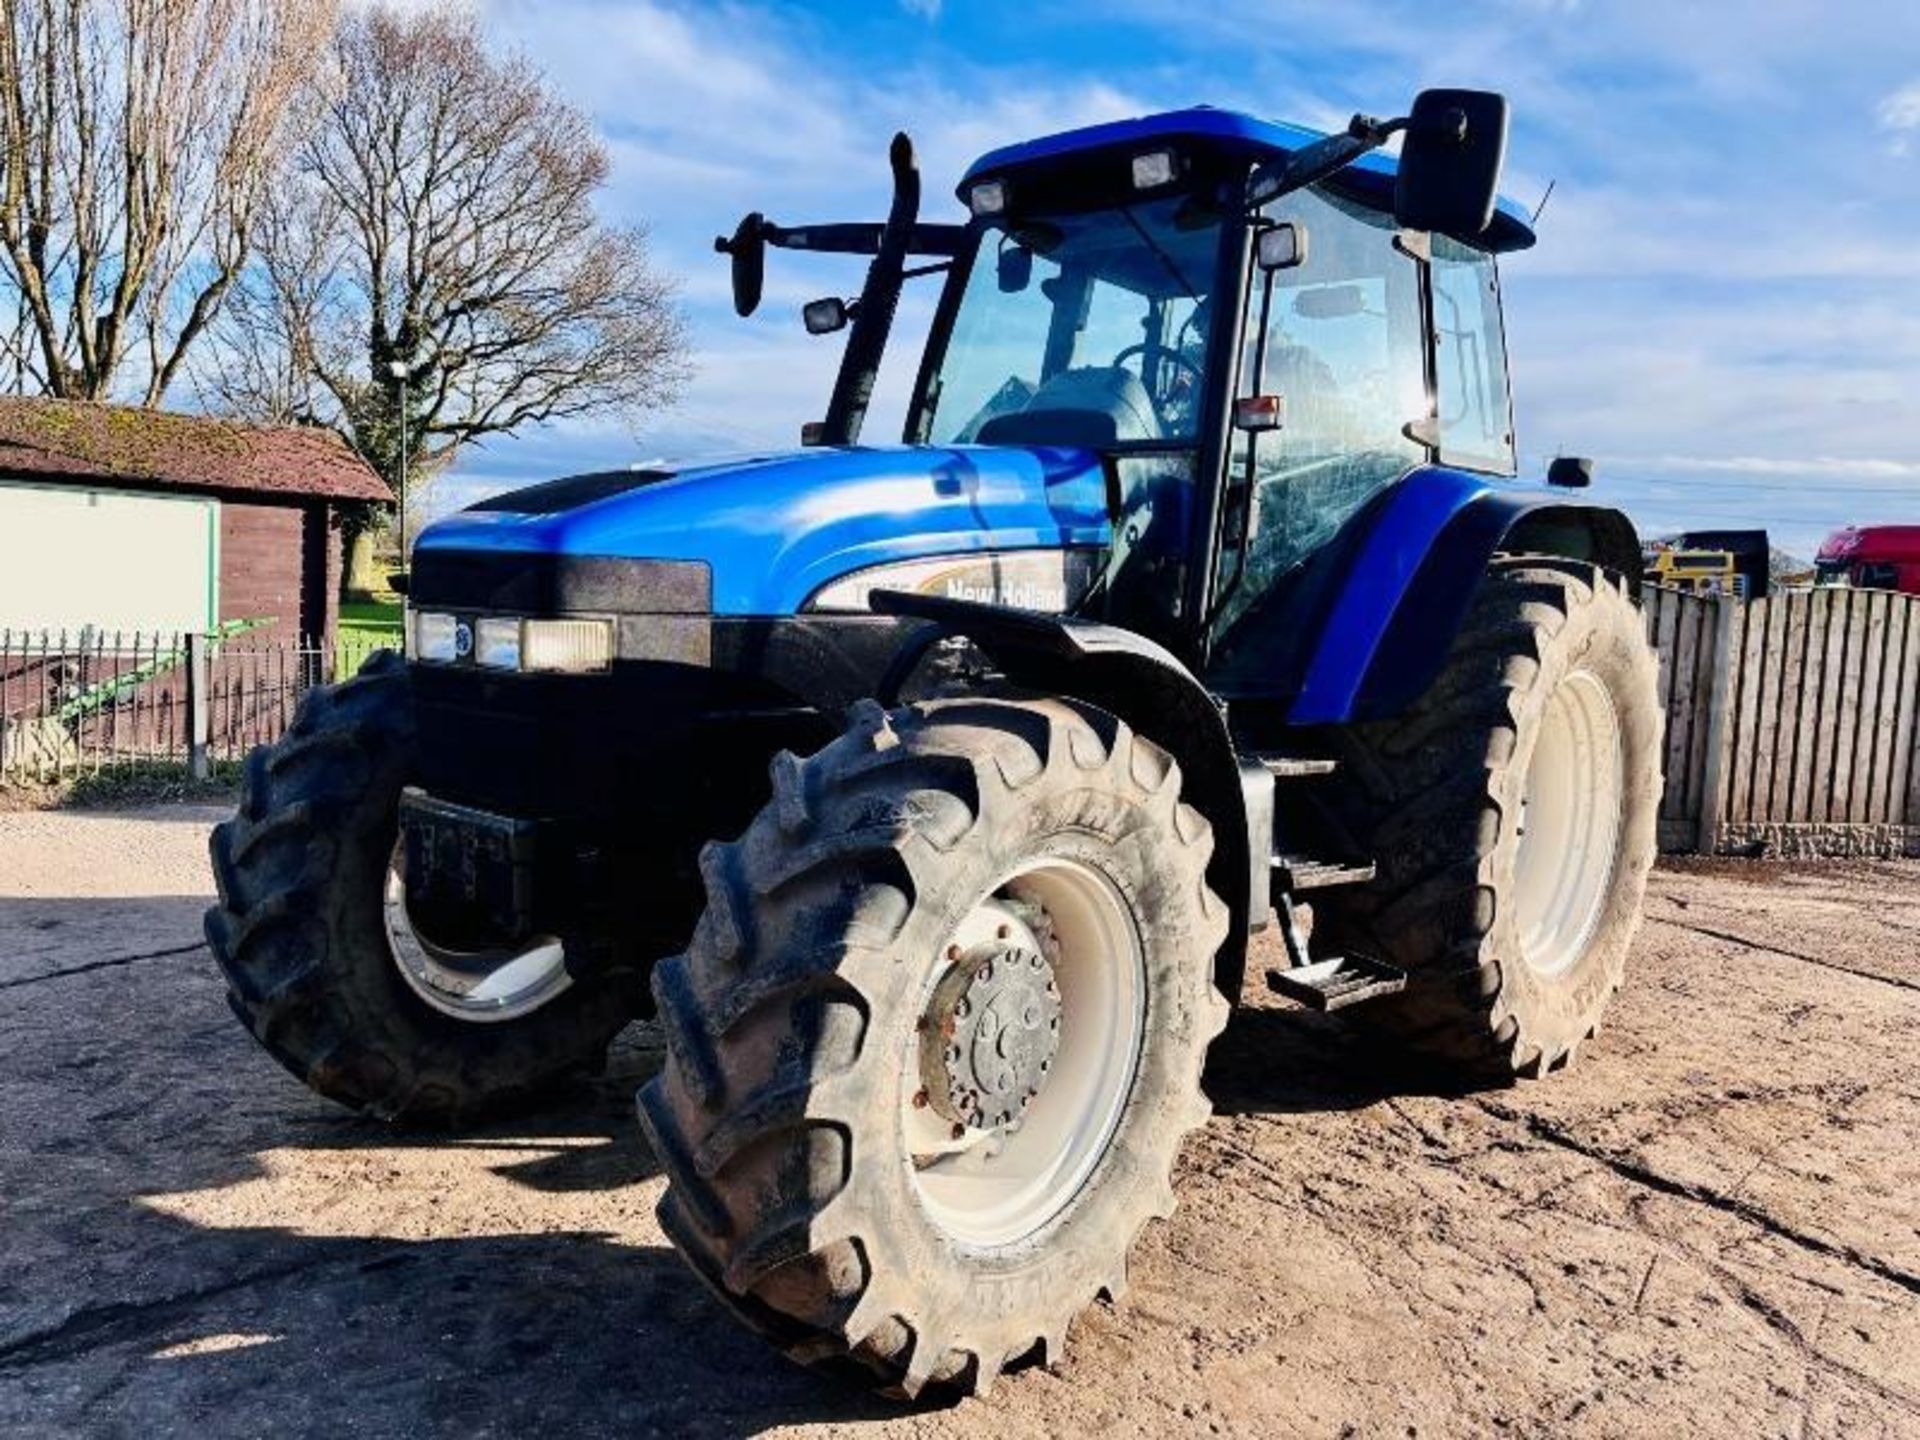 NEW HOLLAND TM155 4WD TRACTOR *5619 HOURS* C/W RANGE COMMAND GEAR BOX - Image 18 of 19